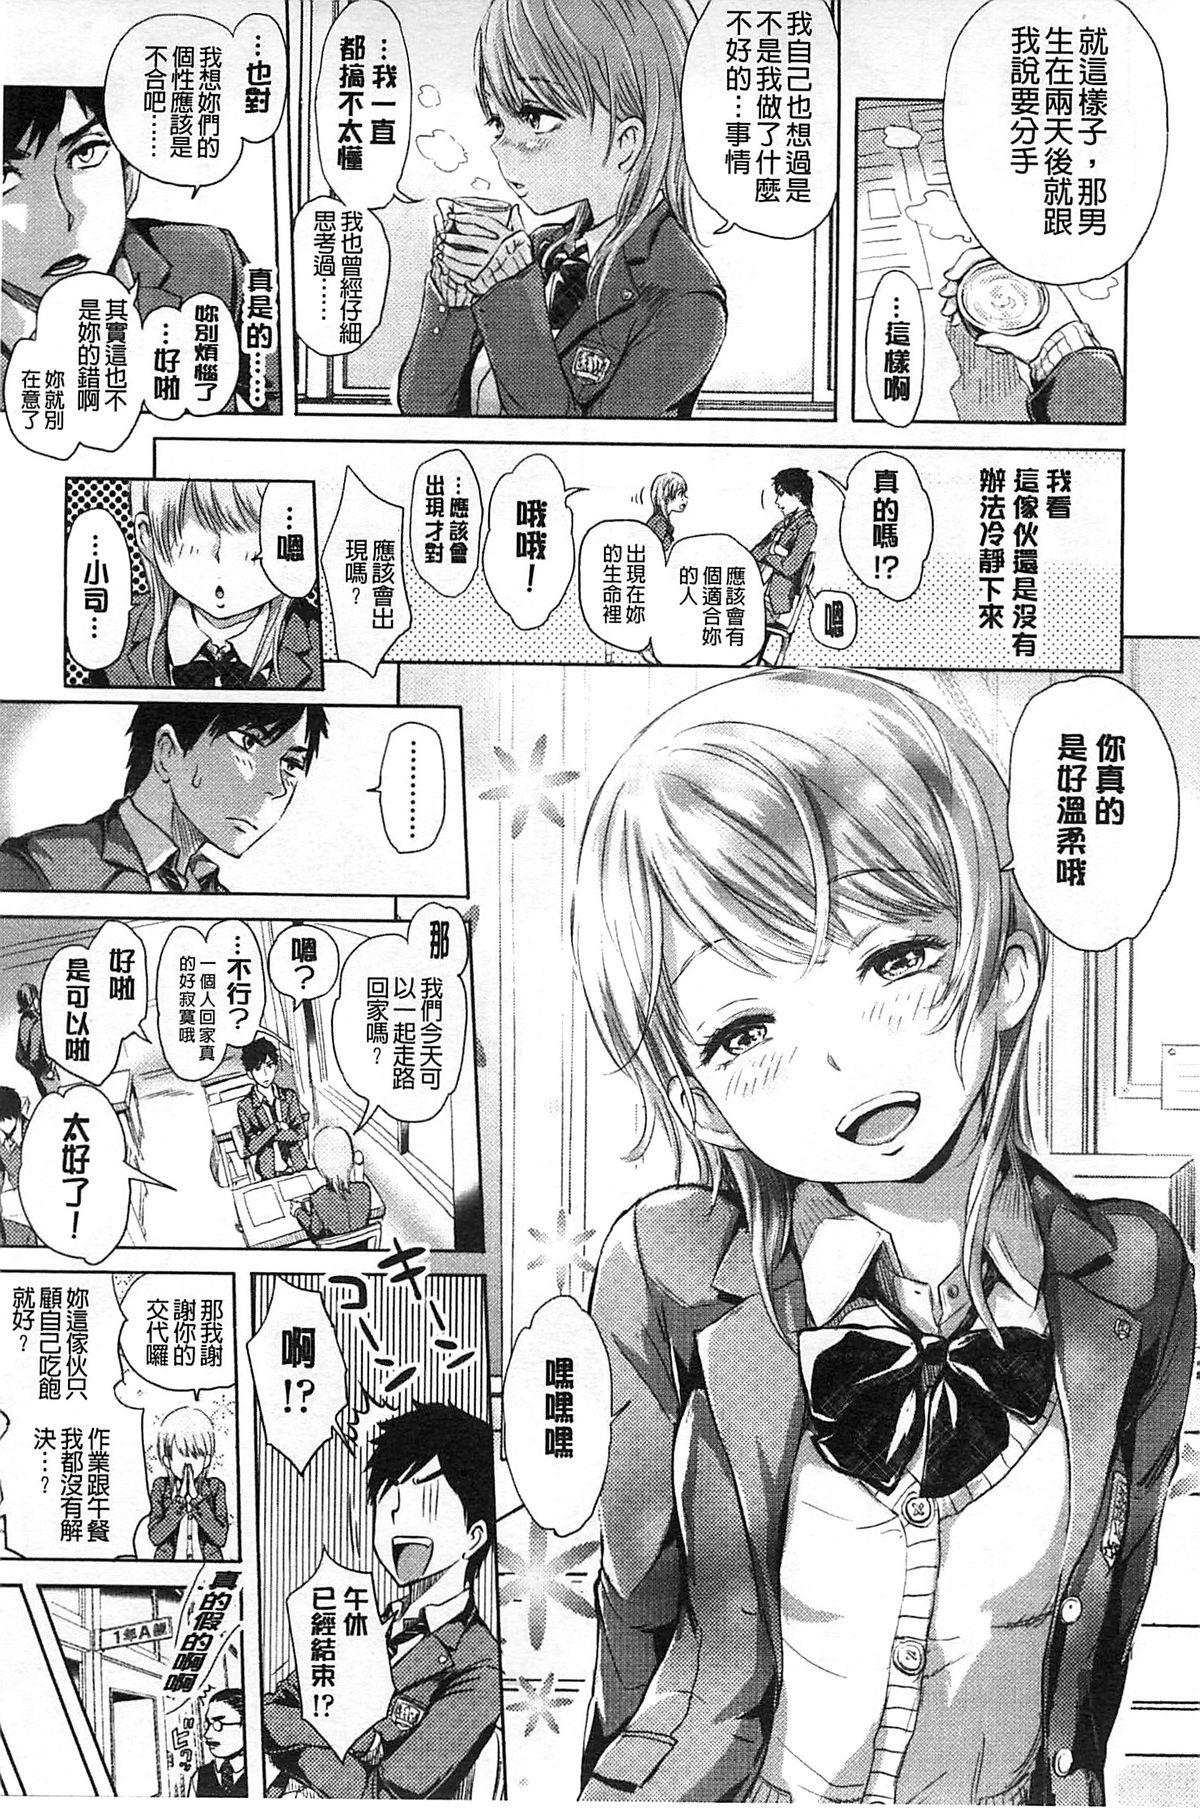 Mask Mida Love | 淫亂之愛 Family Taboo - Page 6